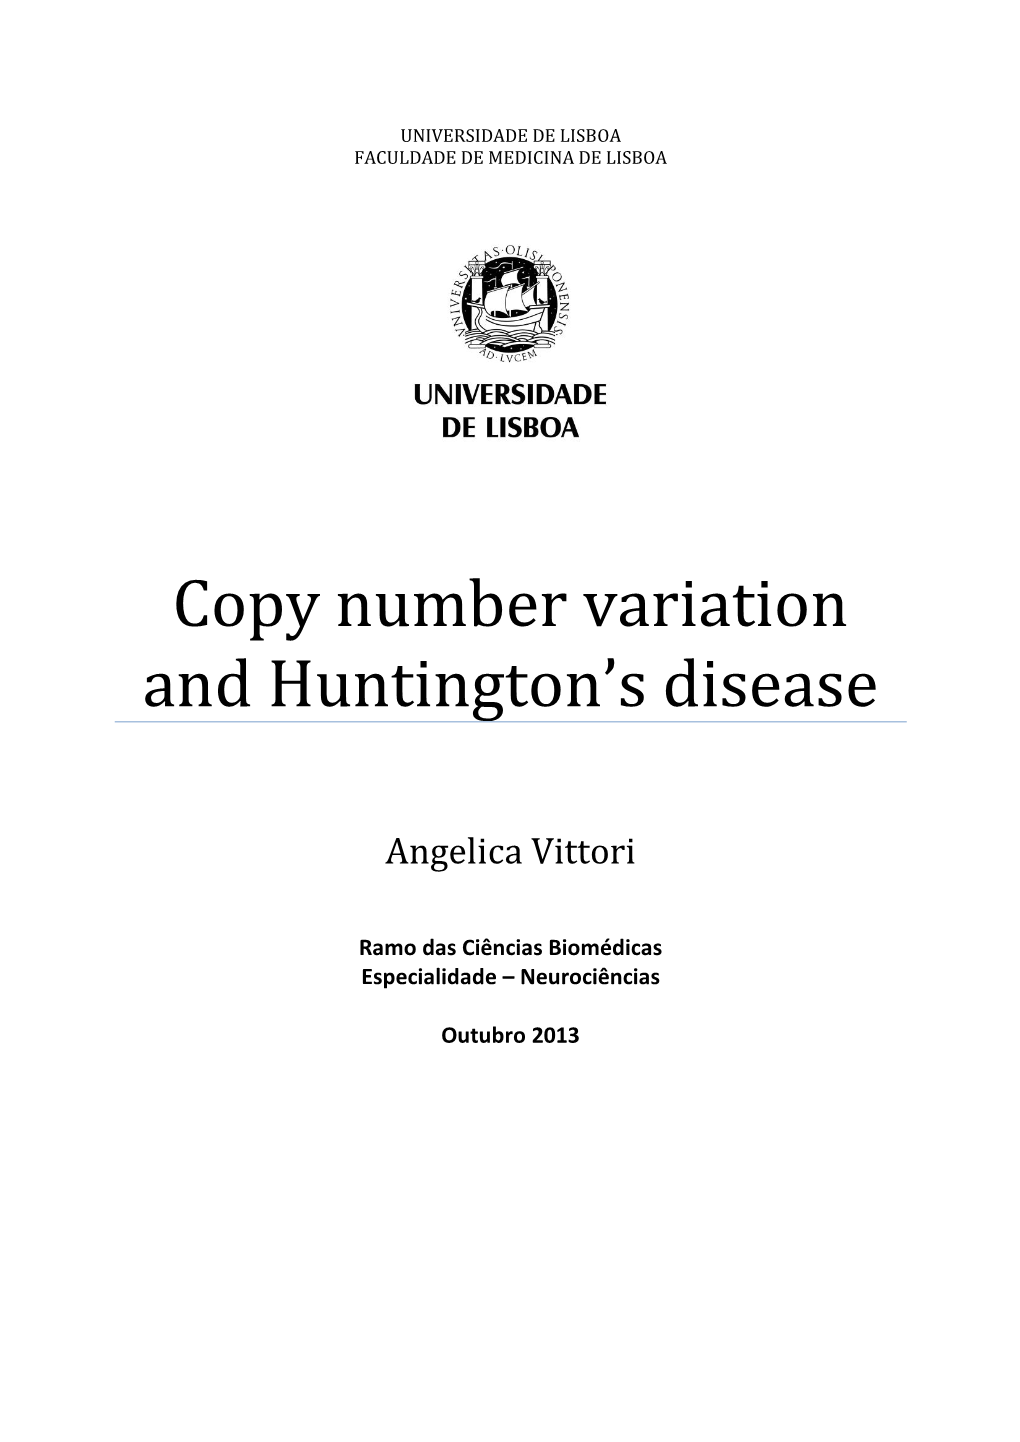 Copy Number Variation and Huntington's Disease